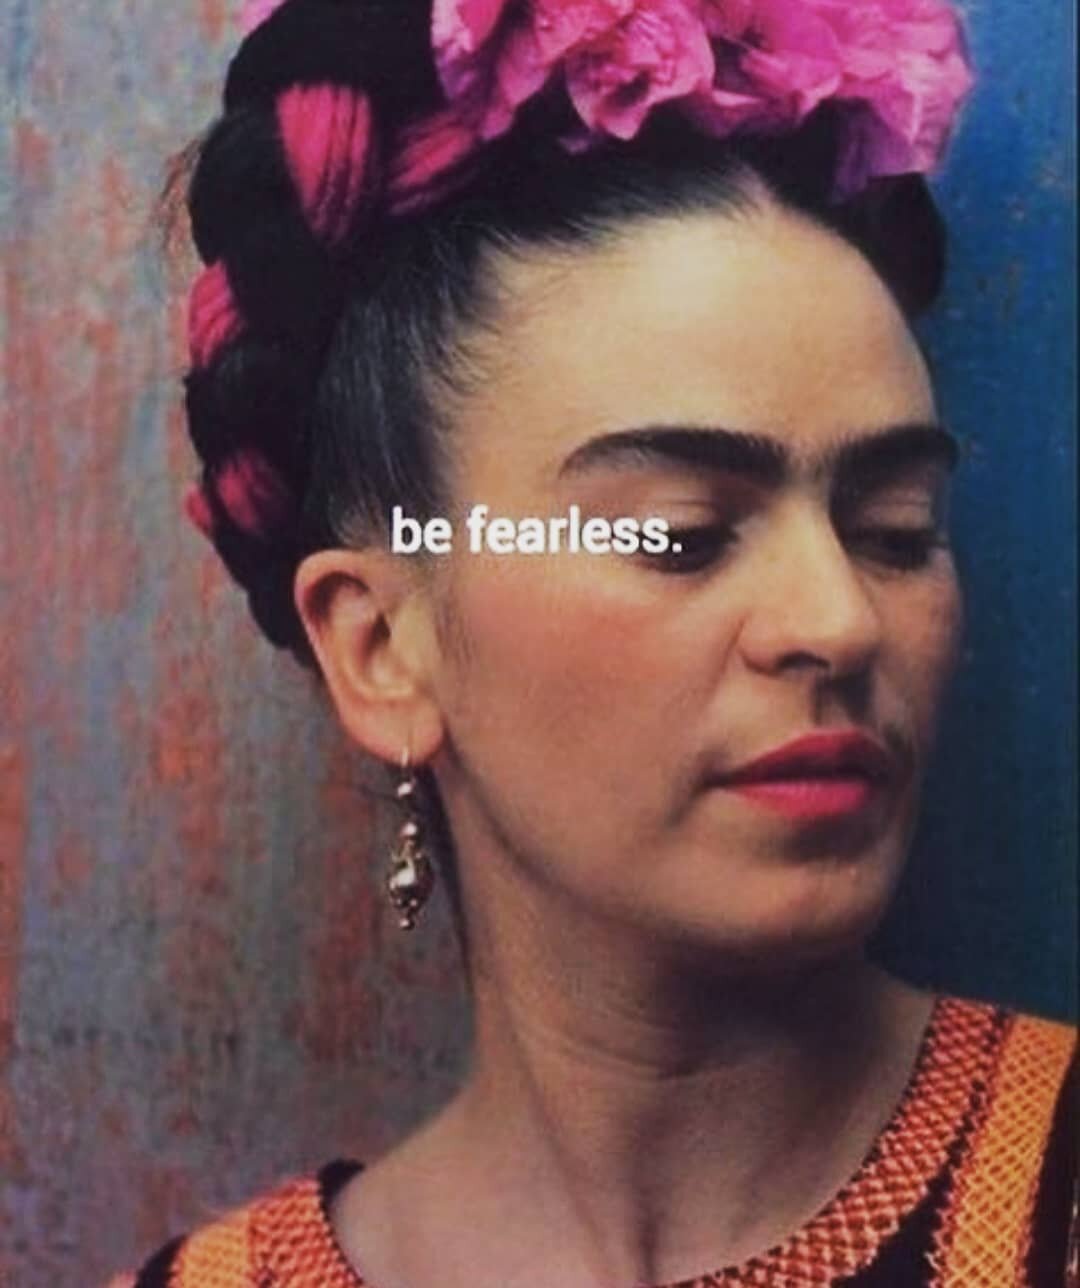 Frida is one of the greatest teachers of fearlessness. Gracias Maestra. 🙏🏼

But, let's also be real. We all have fears...and that's okay too. I think Frida has taught us to face our fears, live through our fears, and express our fears in beautiful 